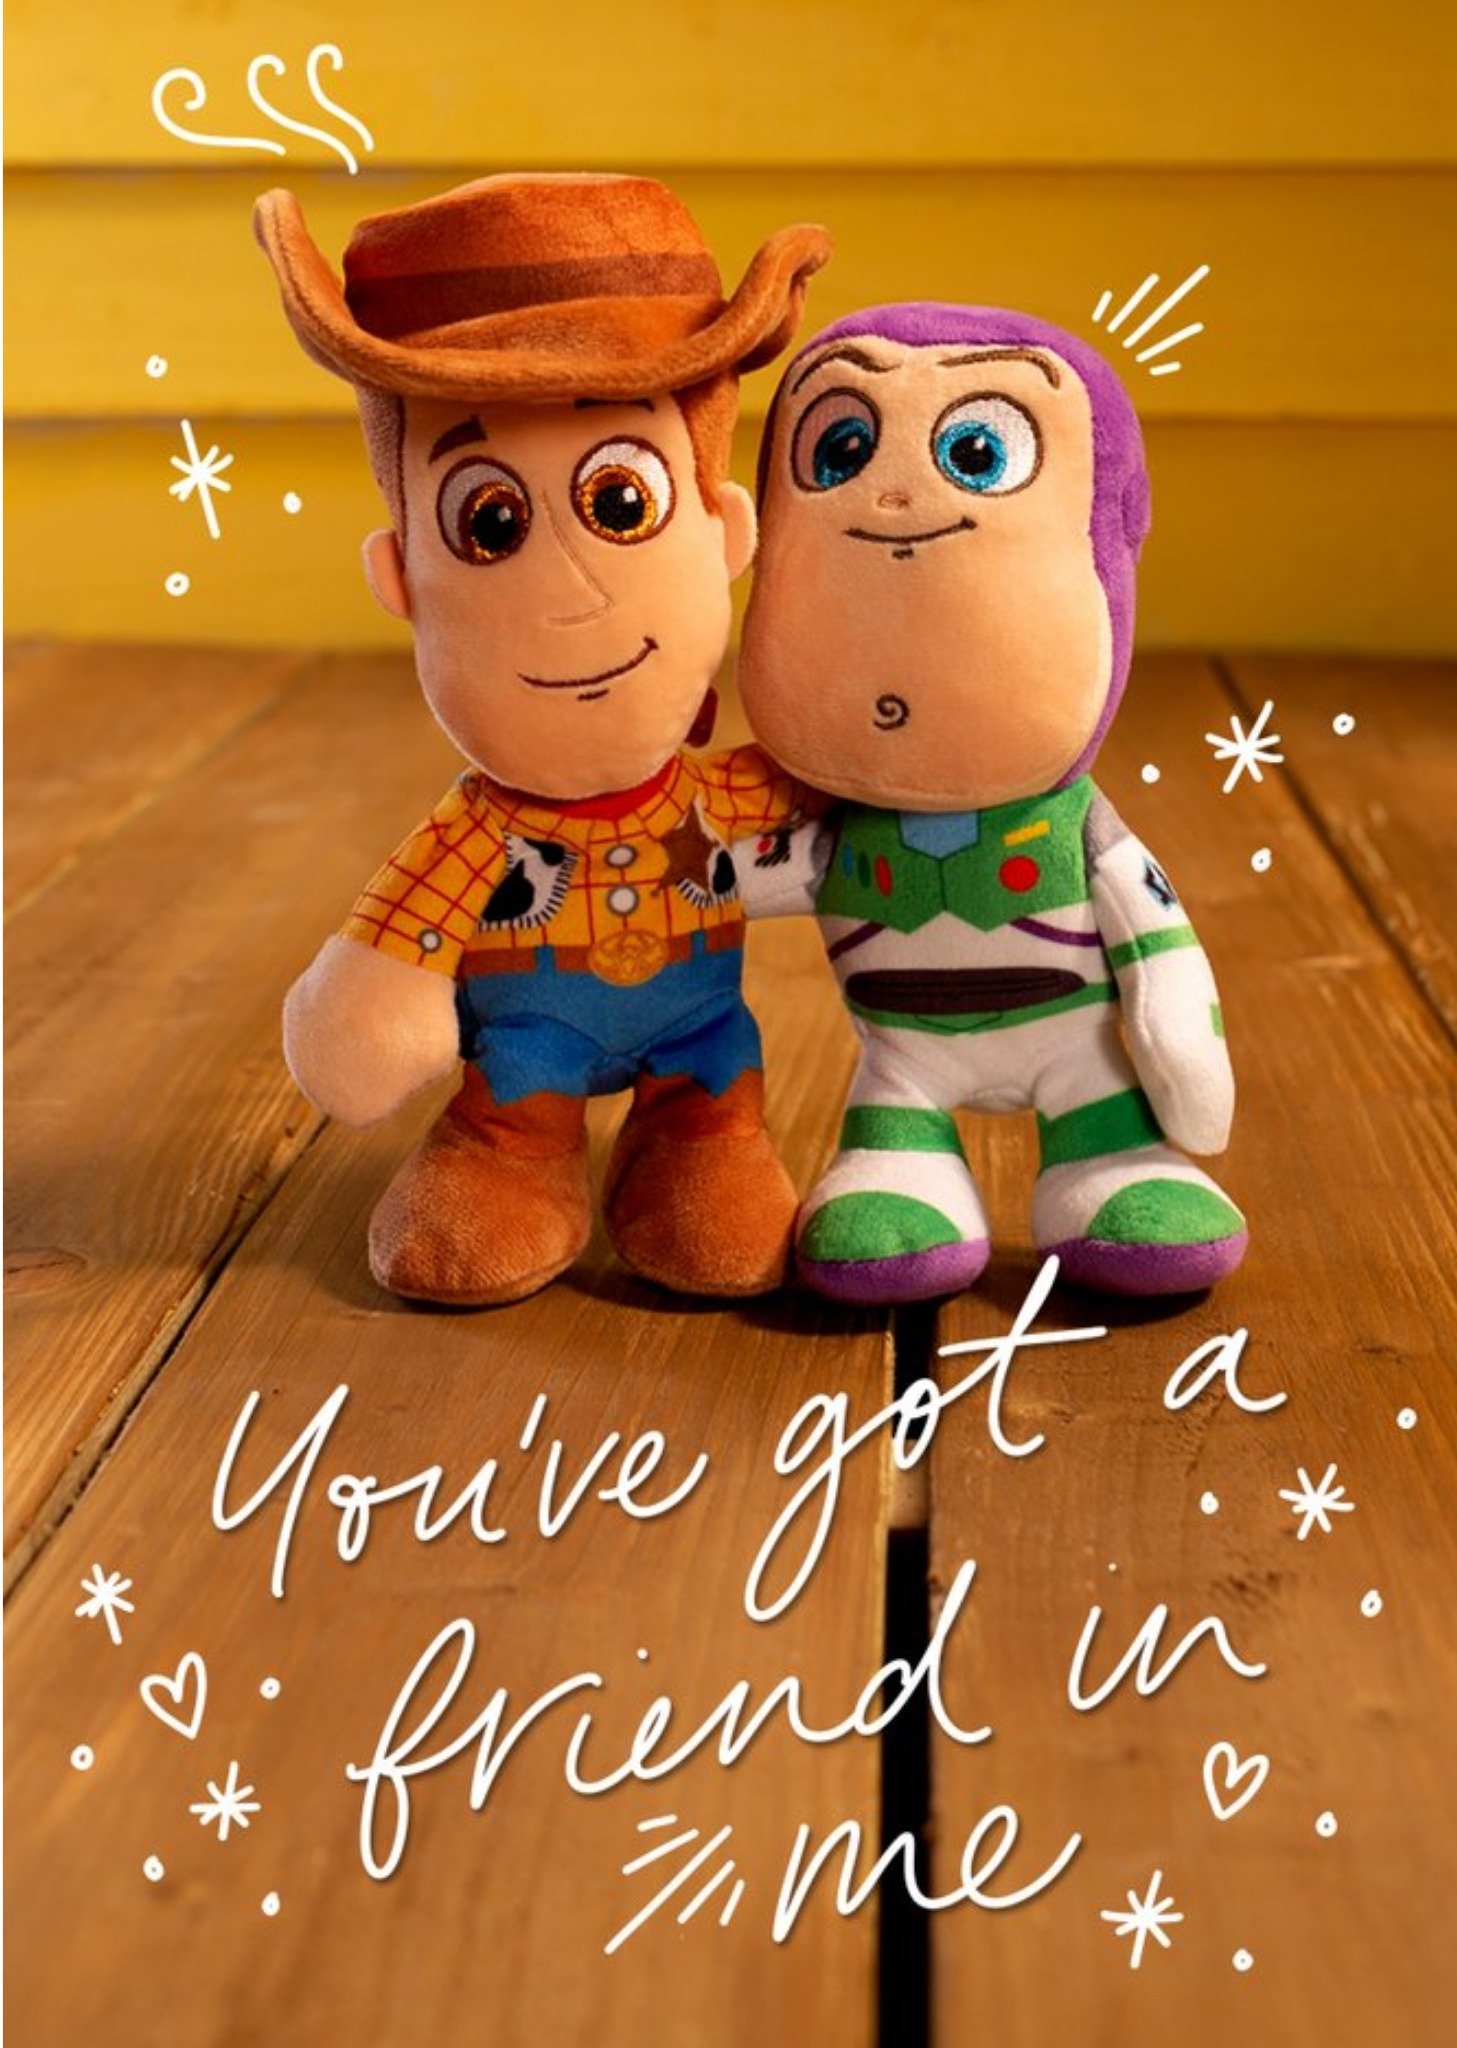 Cute Disney Plush Toy Story Woody And Buzz Friend In Me Thinking Of You Card, Large